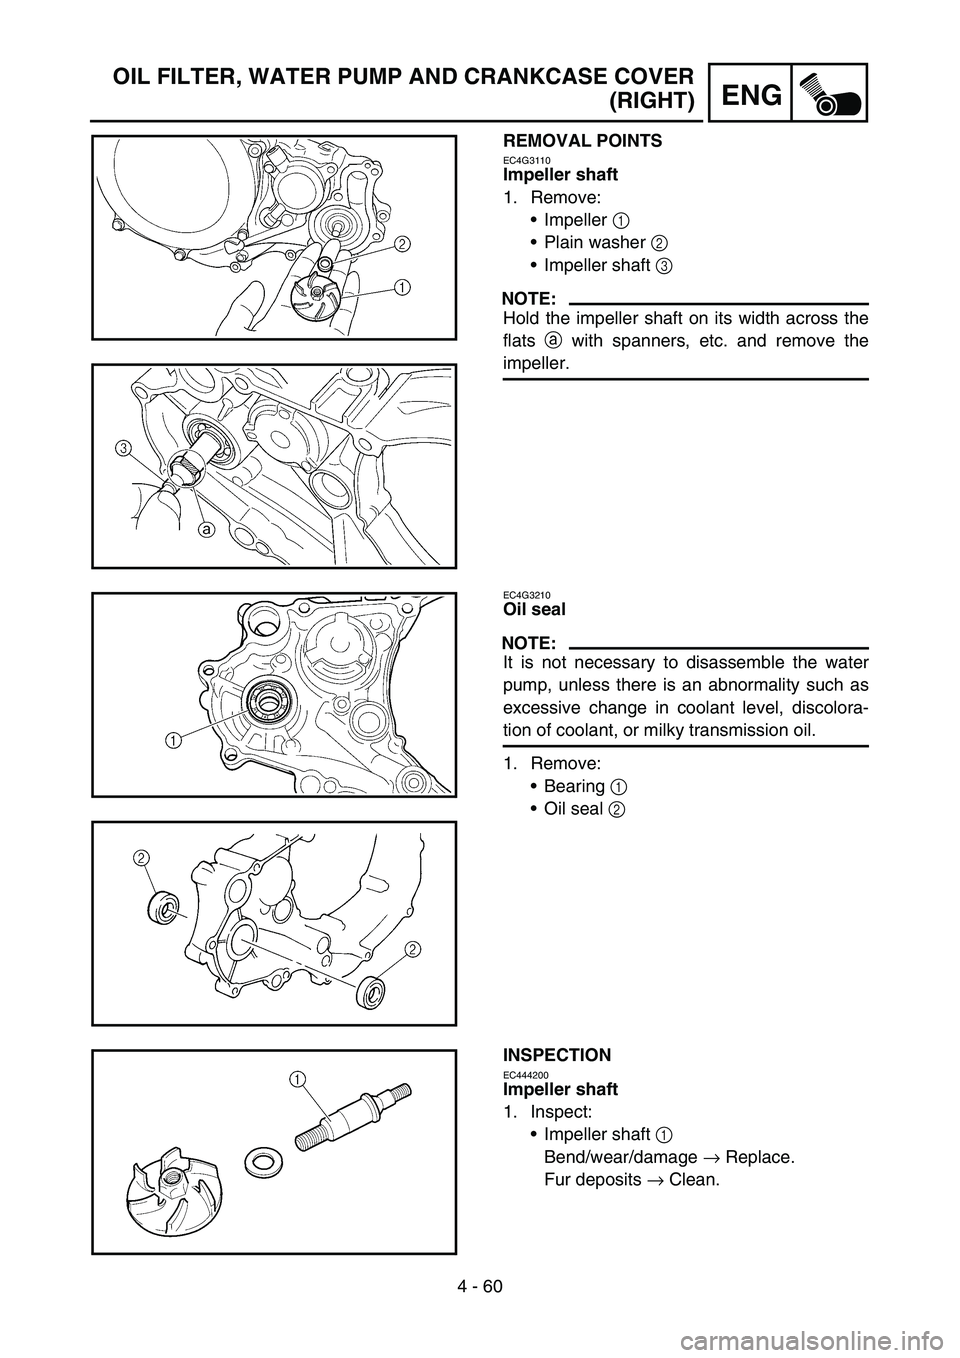 YAMAHA WR 450F 2005  Owners Manual 4 - 60
ENG
OIL FILTER, WATER PUMP AND CRANKCASE COVER
(RIGHT)
REMOVAL POINTS
EC4G3110
Impeller shaft
1. Remove:
Impeller 1 
Plain washer 2 
Impeller shaft 3 
NOTE:
Hold the impeller shaft on its wi